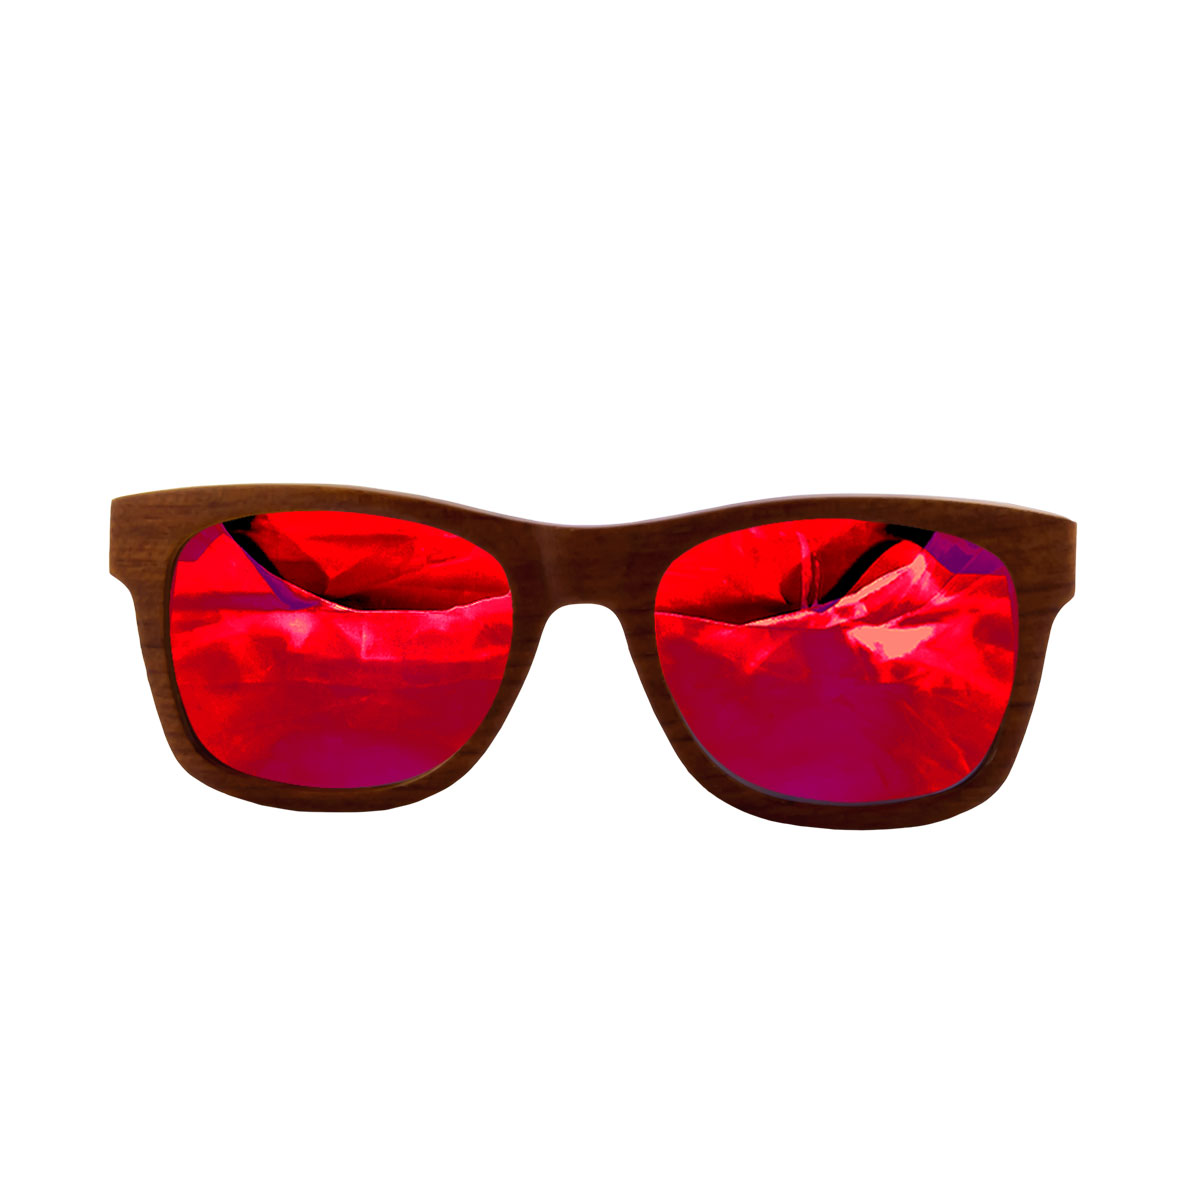 Rosewood Sunglasses, Red Mirror Lens - Social Paintball